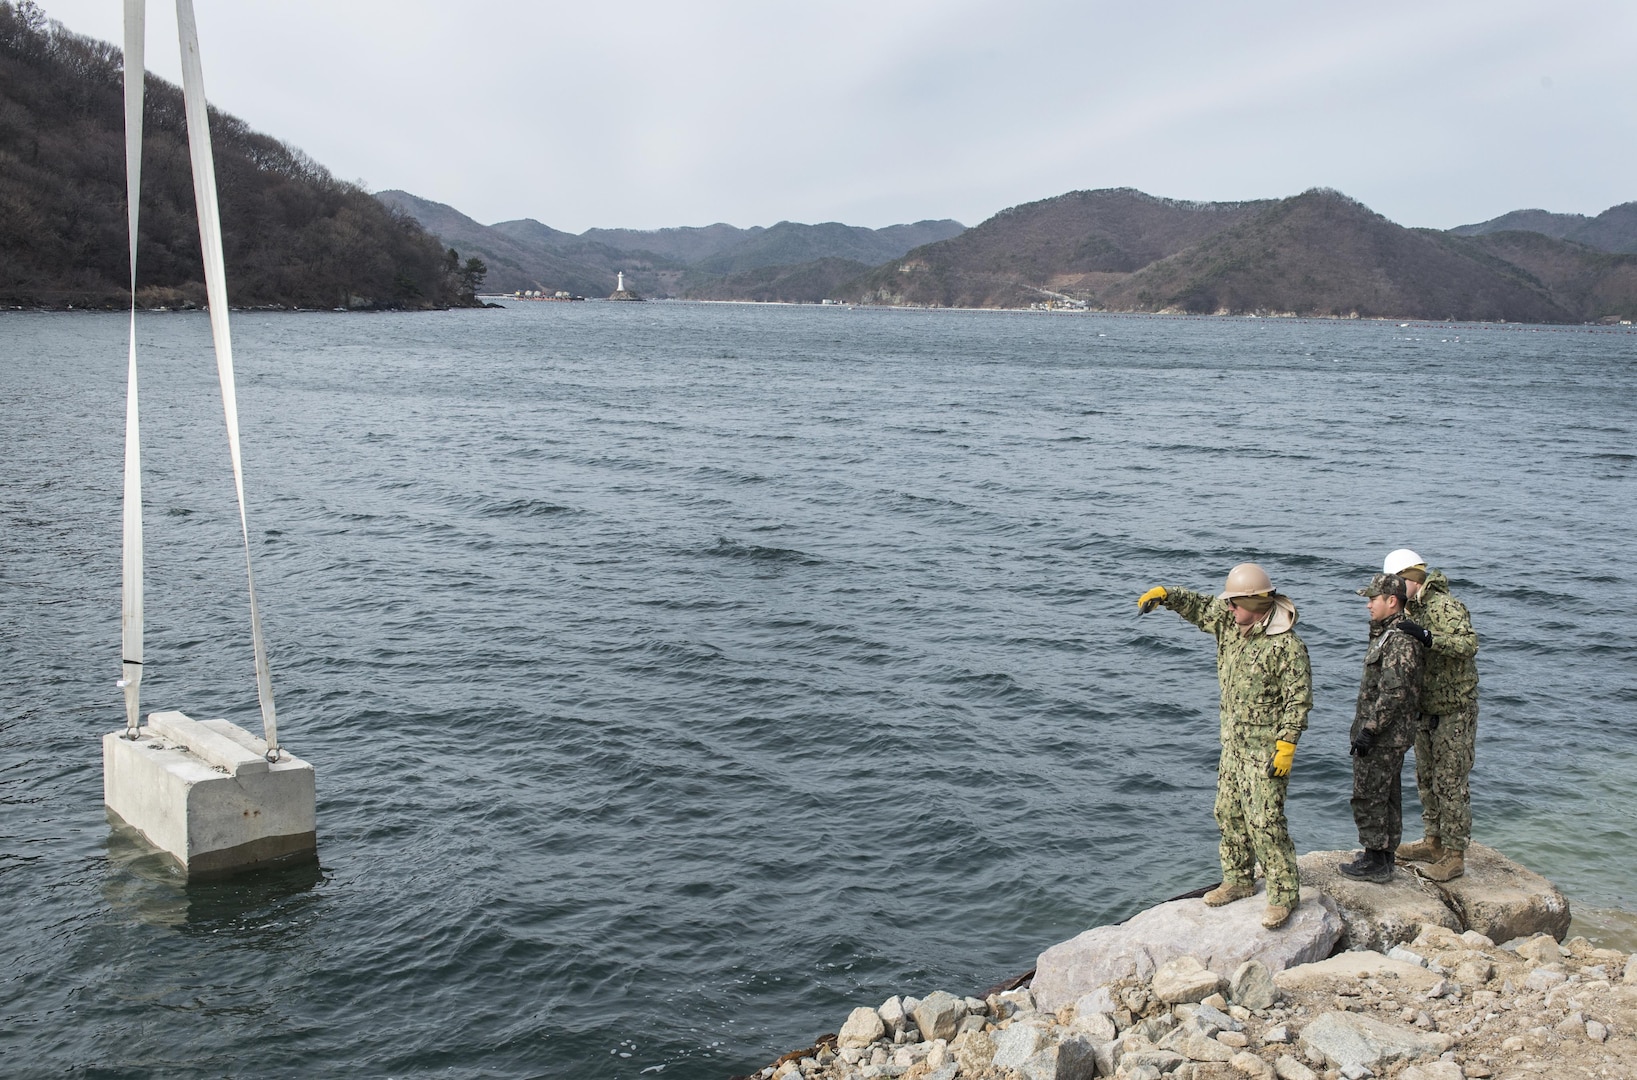 U.S. Navy Petty Officer 1st Class Jesse Hamblin, left, directs the movement of a cement block into the water during the construction of a simulated expeditionary wharf as part of Exercise Foal Eagle 2016 at Chinhae, South Korea, March 10, 2016. Hamblin is a steelworker assigned to Underwater Construction Team 2. Foal Eagle is an annual, bilateral training exercise designed to enhance the readiness of U.S. and South Korean forces, and their ability to work together during a crisis. Navy photo by Petty Officer 1st Class Charles E. White